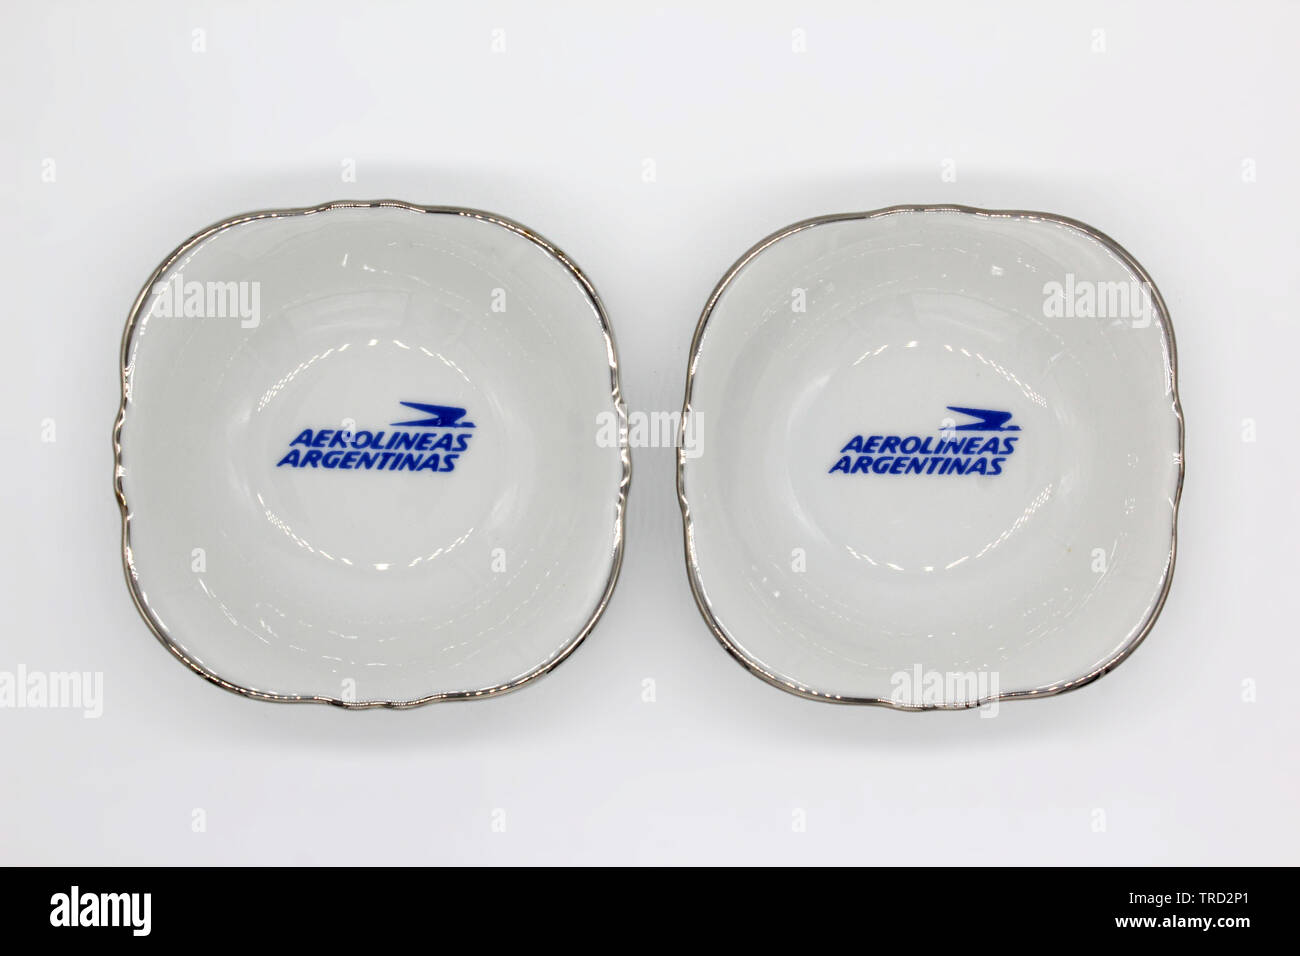 Aerolineas Argentinas porcelain plates with logo printed, isolated on a white background Stock Photo